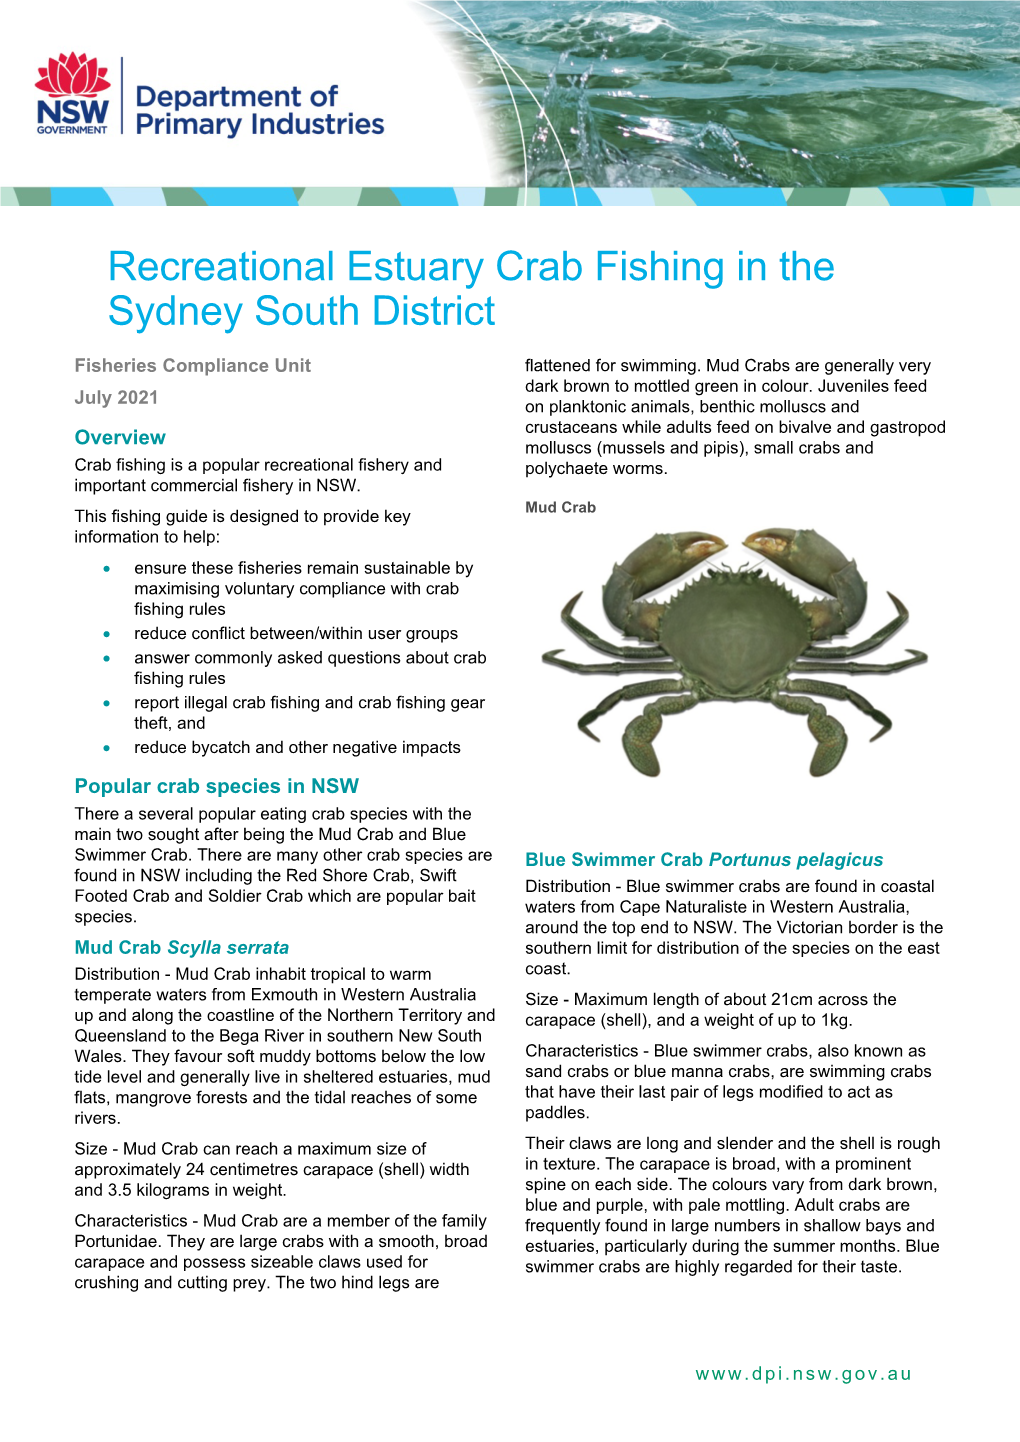 Recreational Estuary Crab Fishing in the Sydney South District